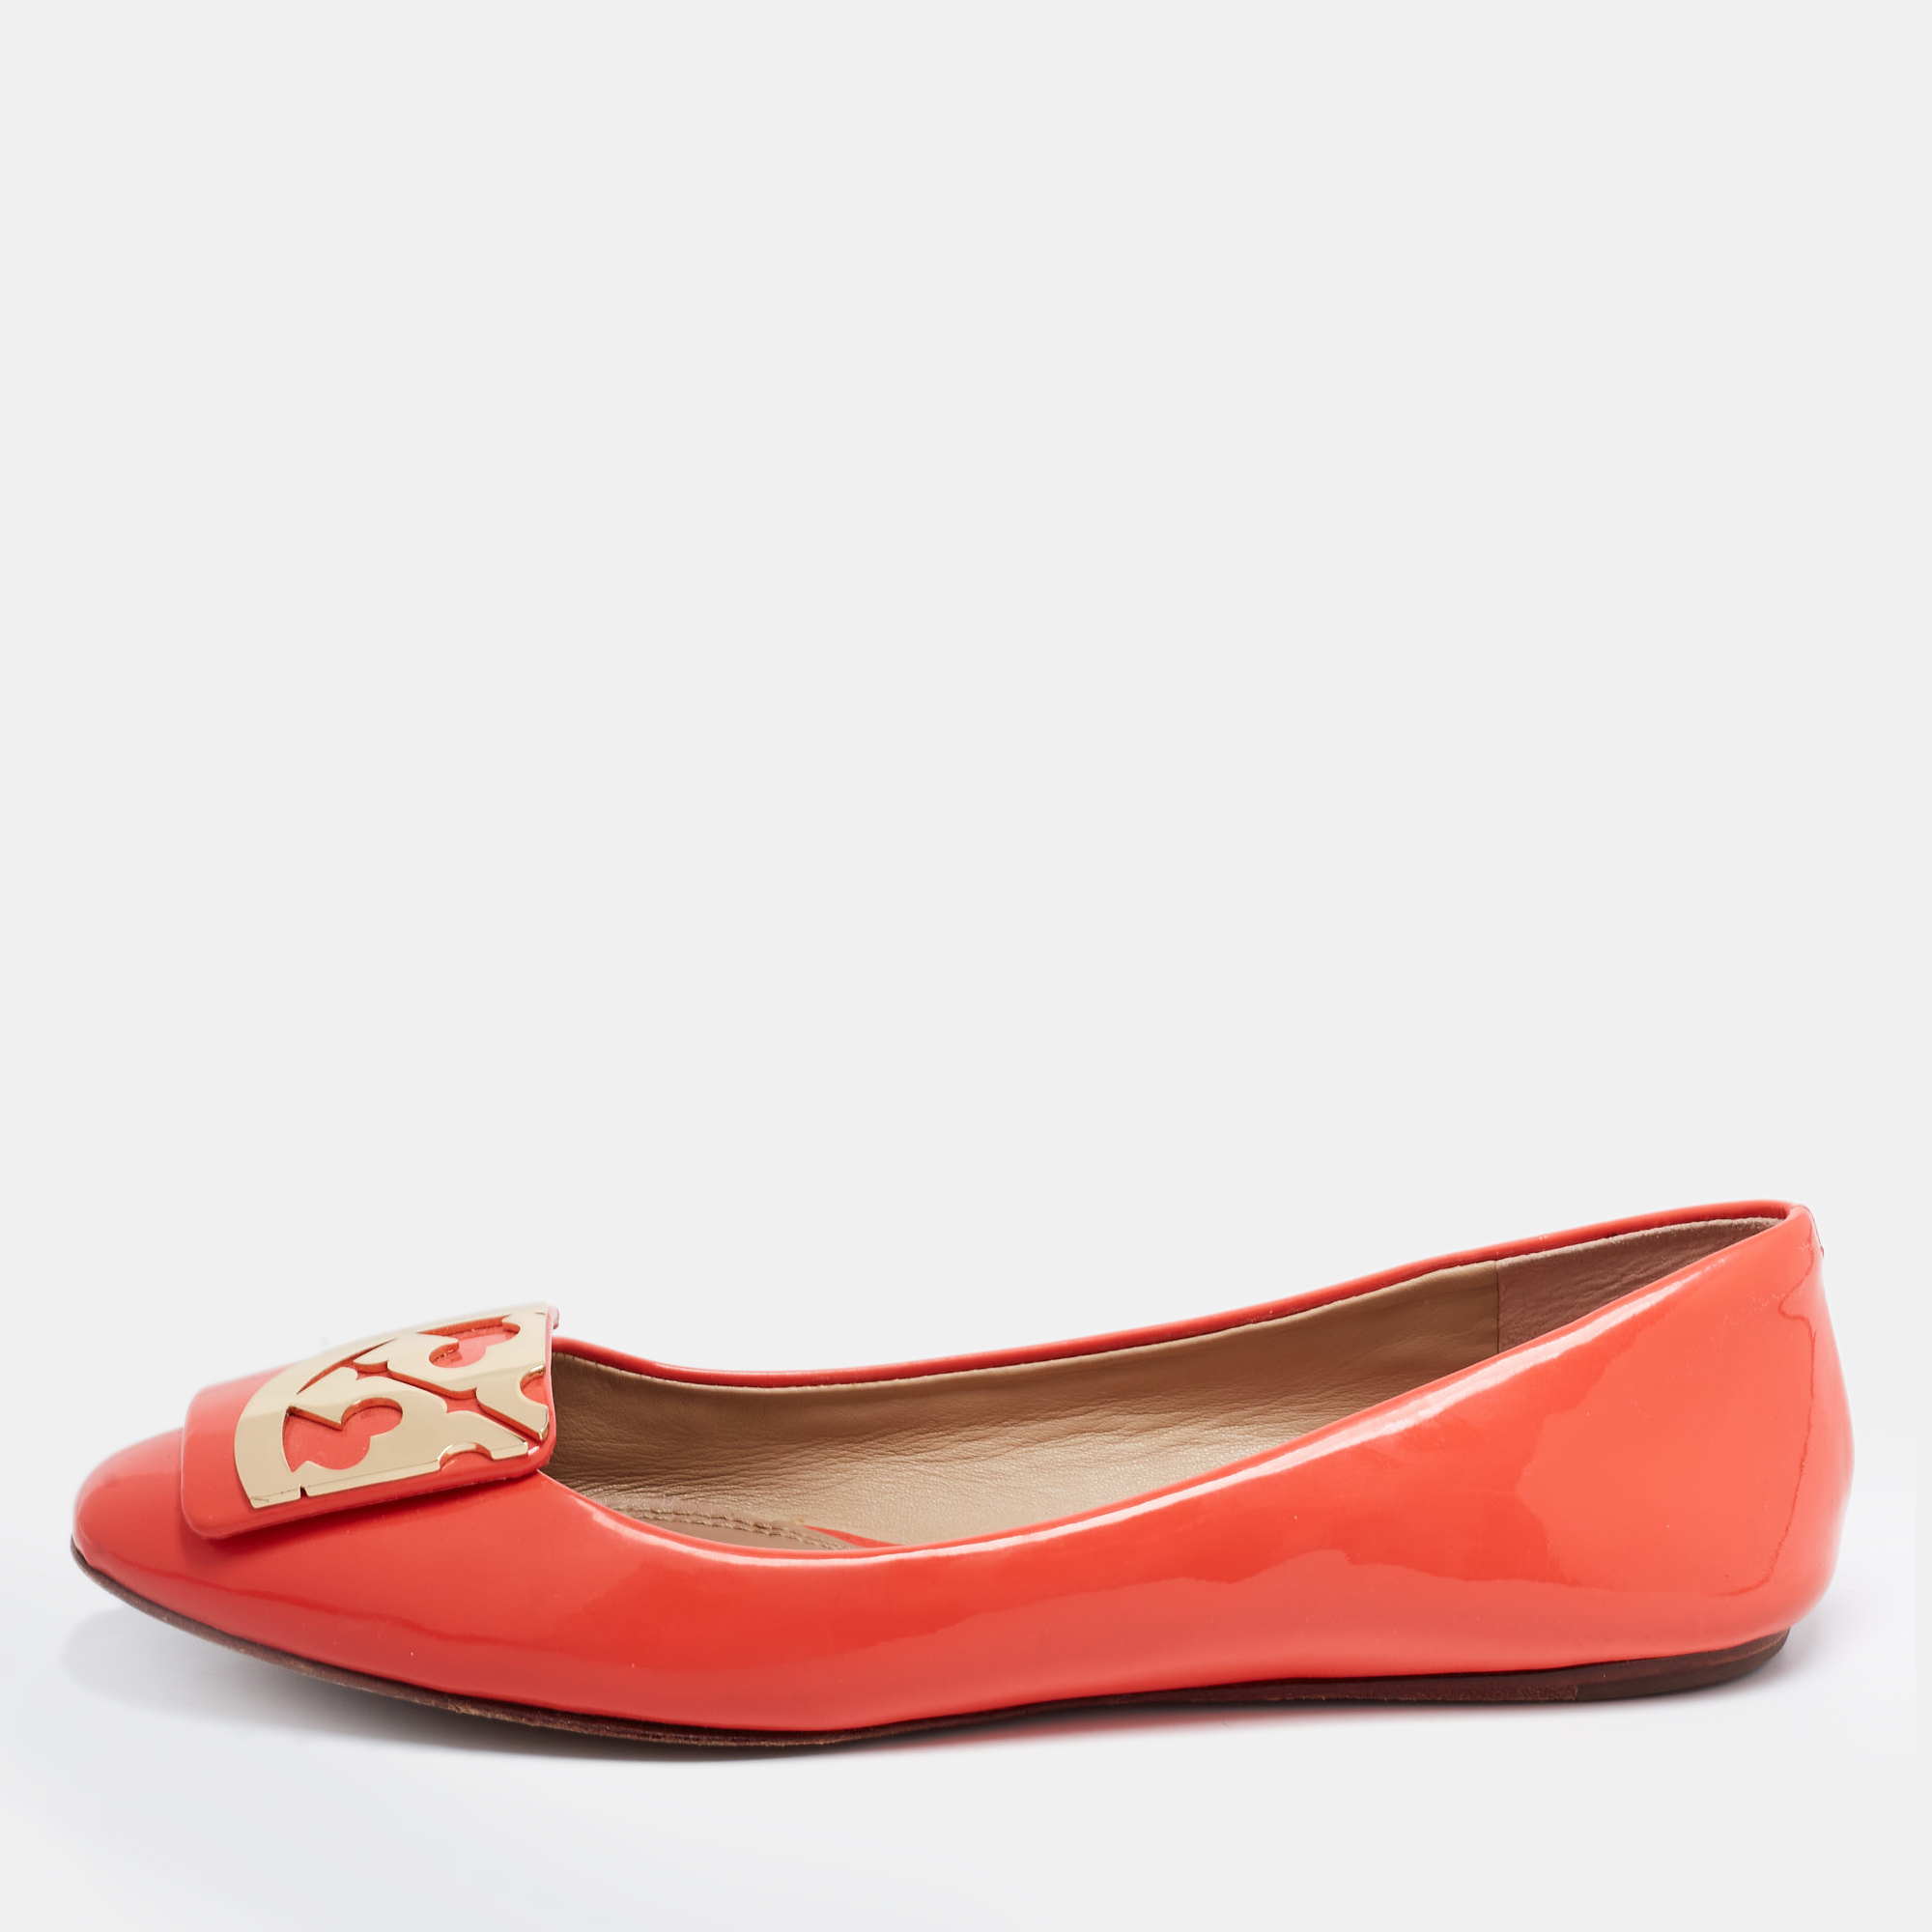 Pre-owned Tory Burch Orange Patent Leather Ballet Flats Size 36.5